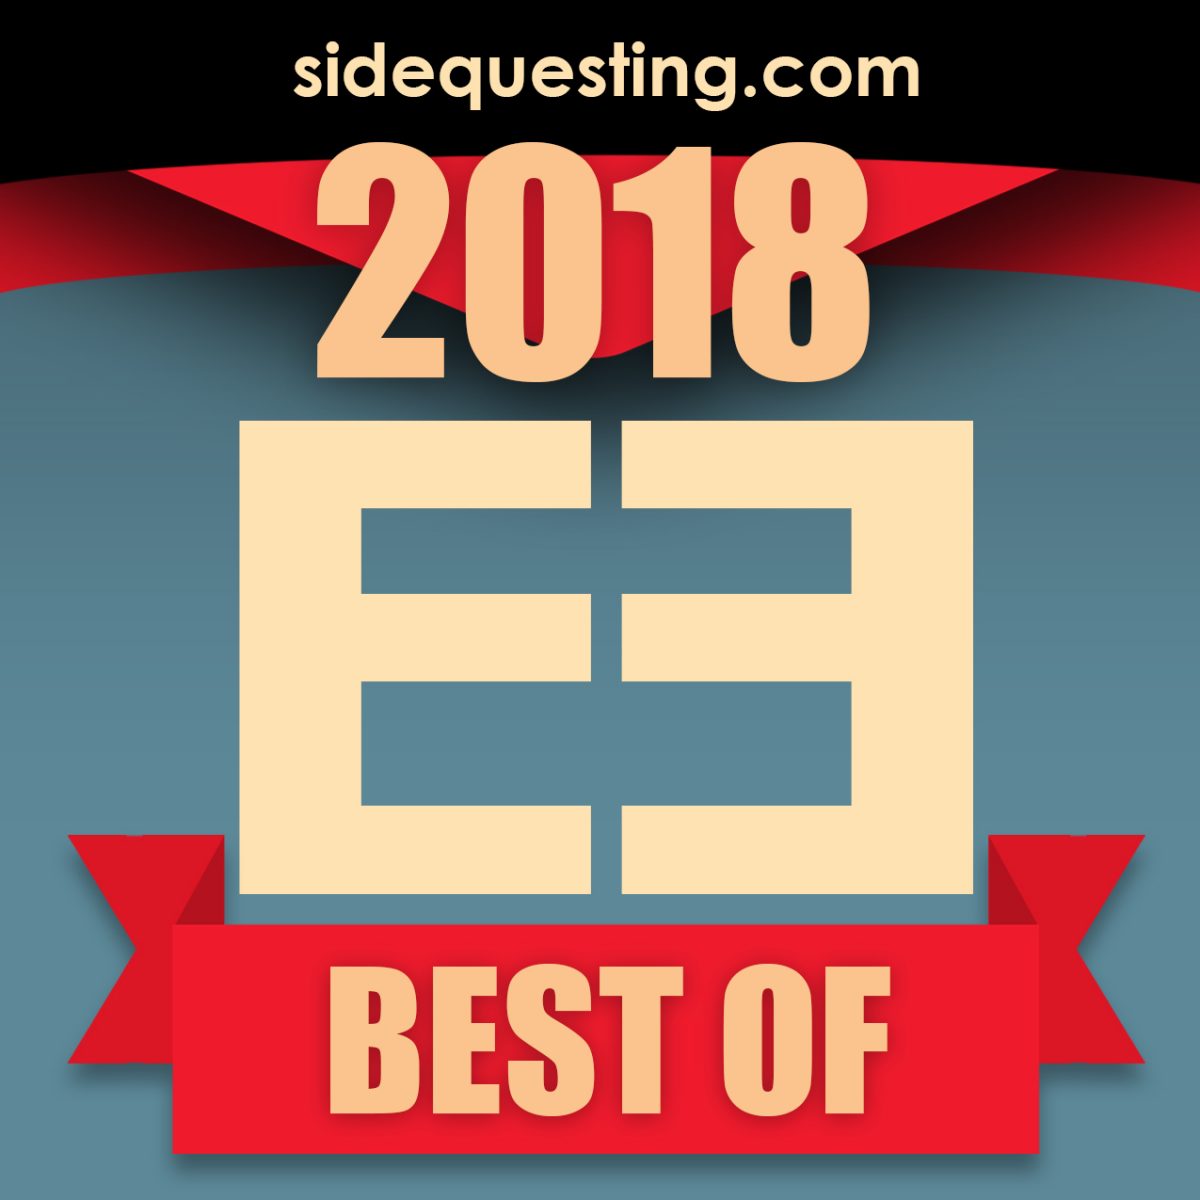 SideQuesting’s Best of E3 2018 revealed